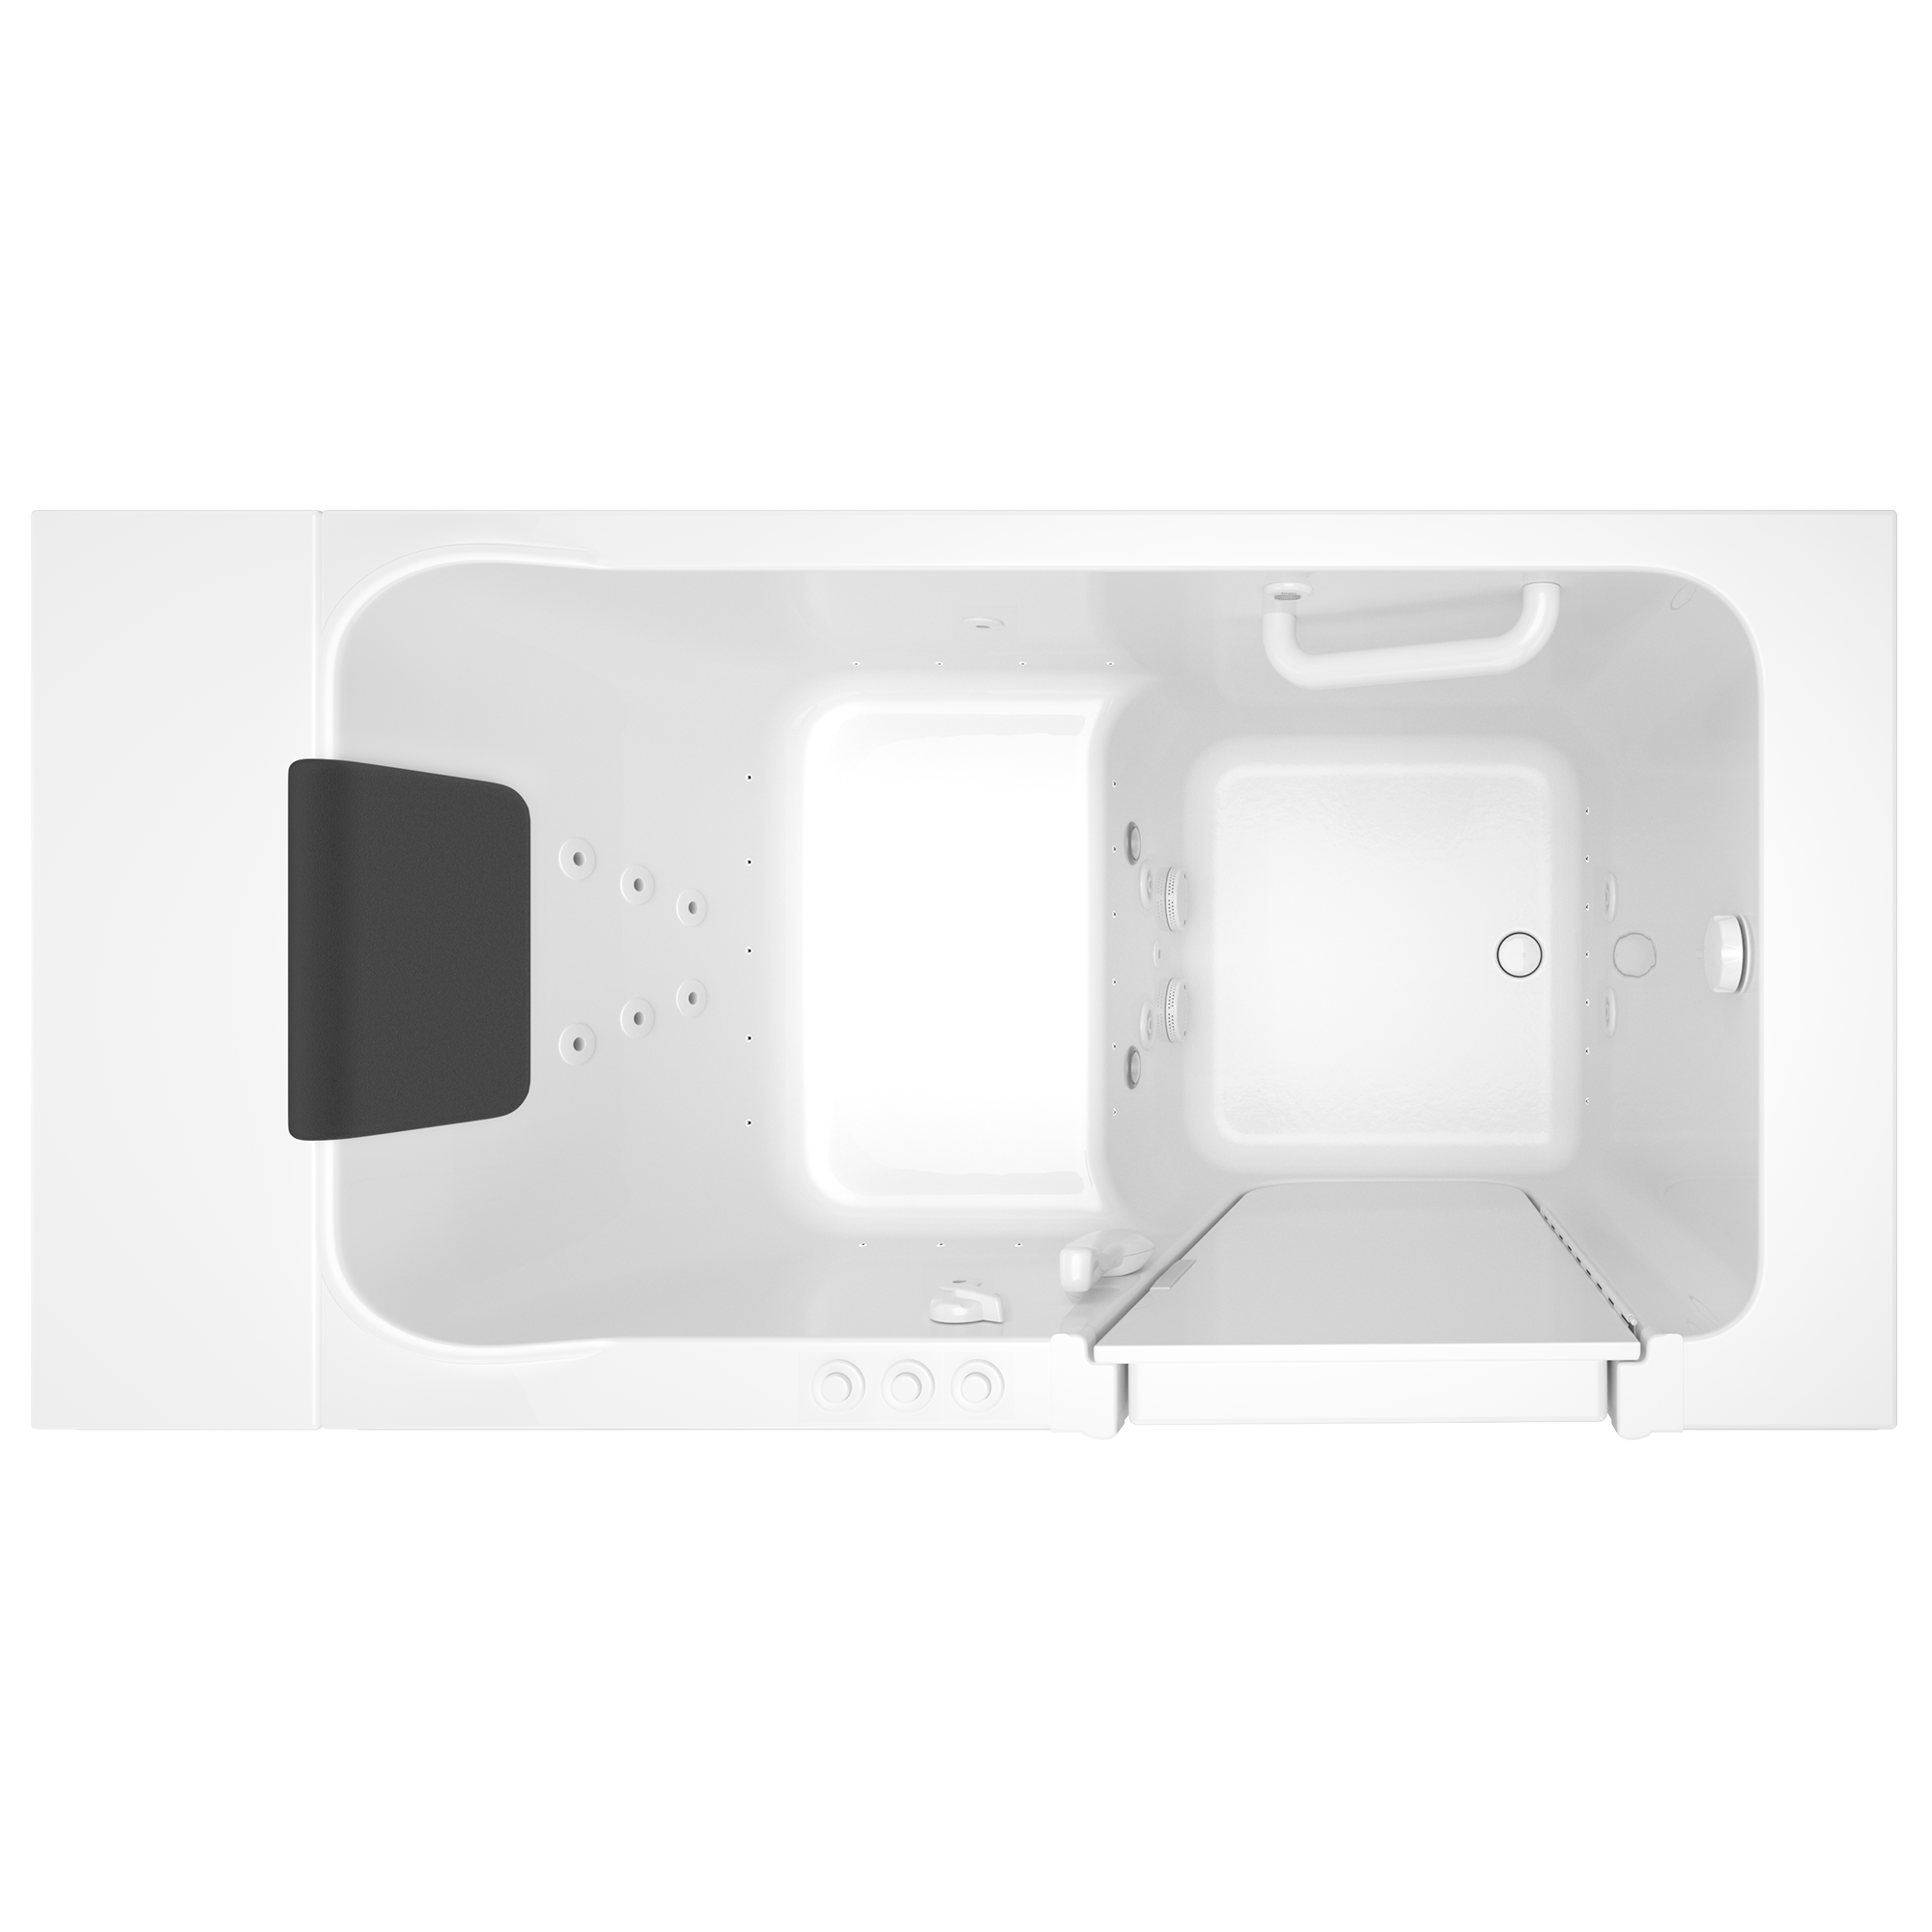 Acrylic Luxury Series 30 x 51 -Inch Walk-in Tub With Combination Air Spa and Whirlpool Systems - Right-Hand Drain